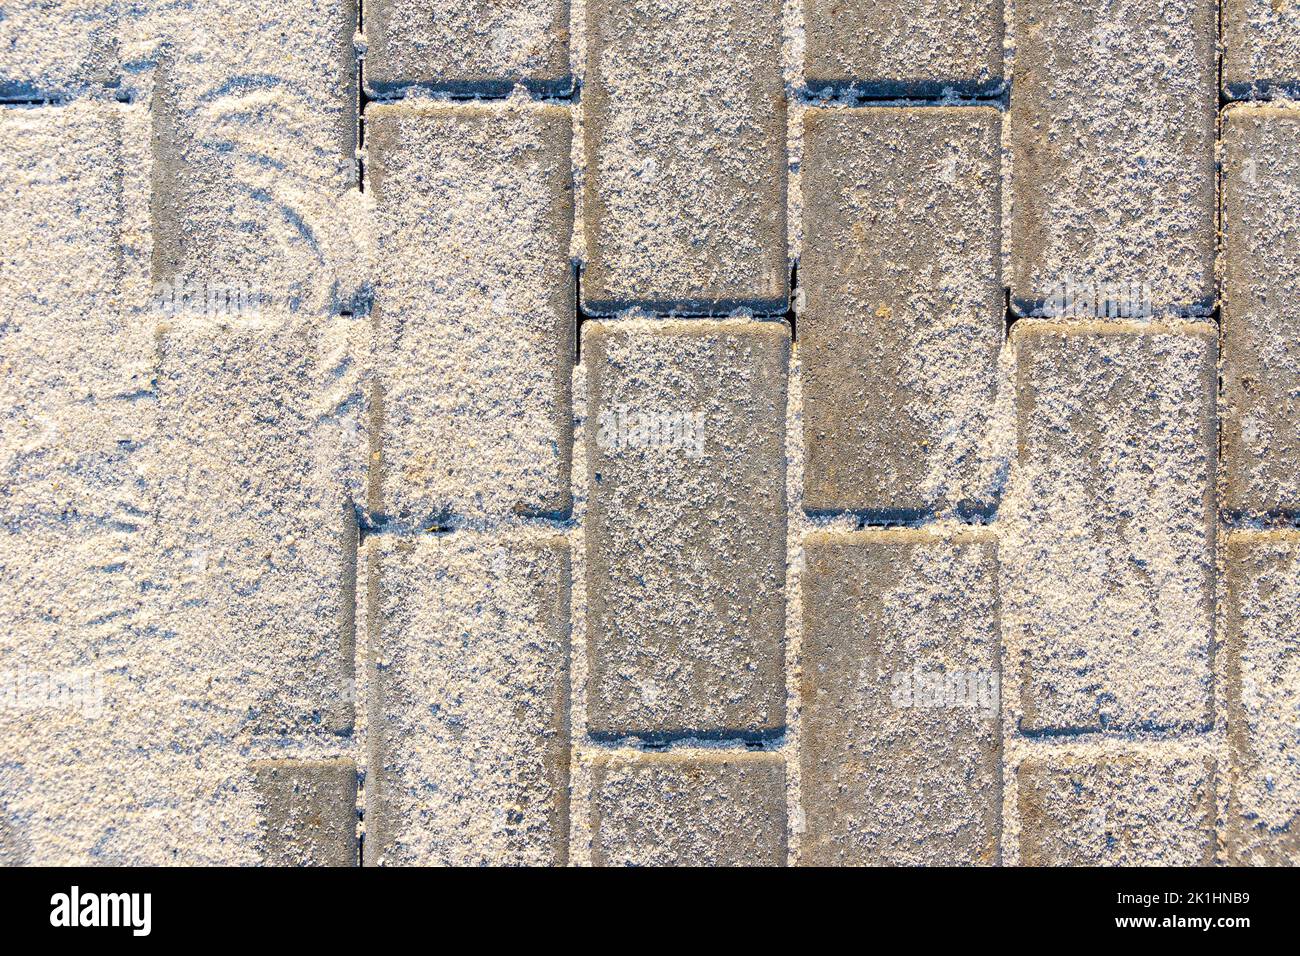 paving slabs made of artificial stone at the stage of filling the joints with dry sifted sand, selective focus Stock Photo